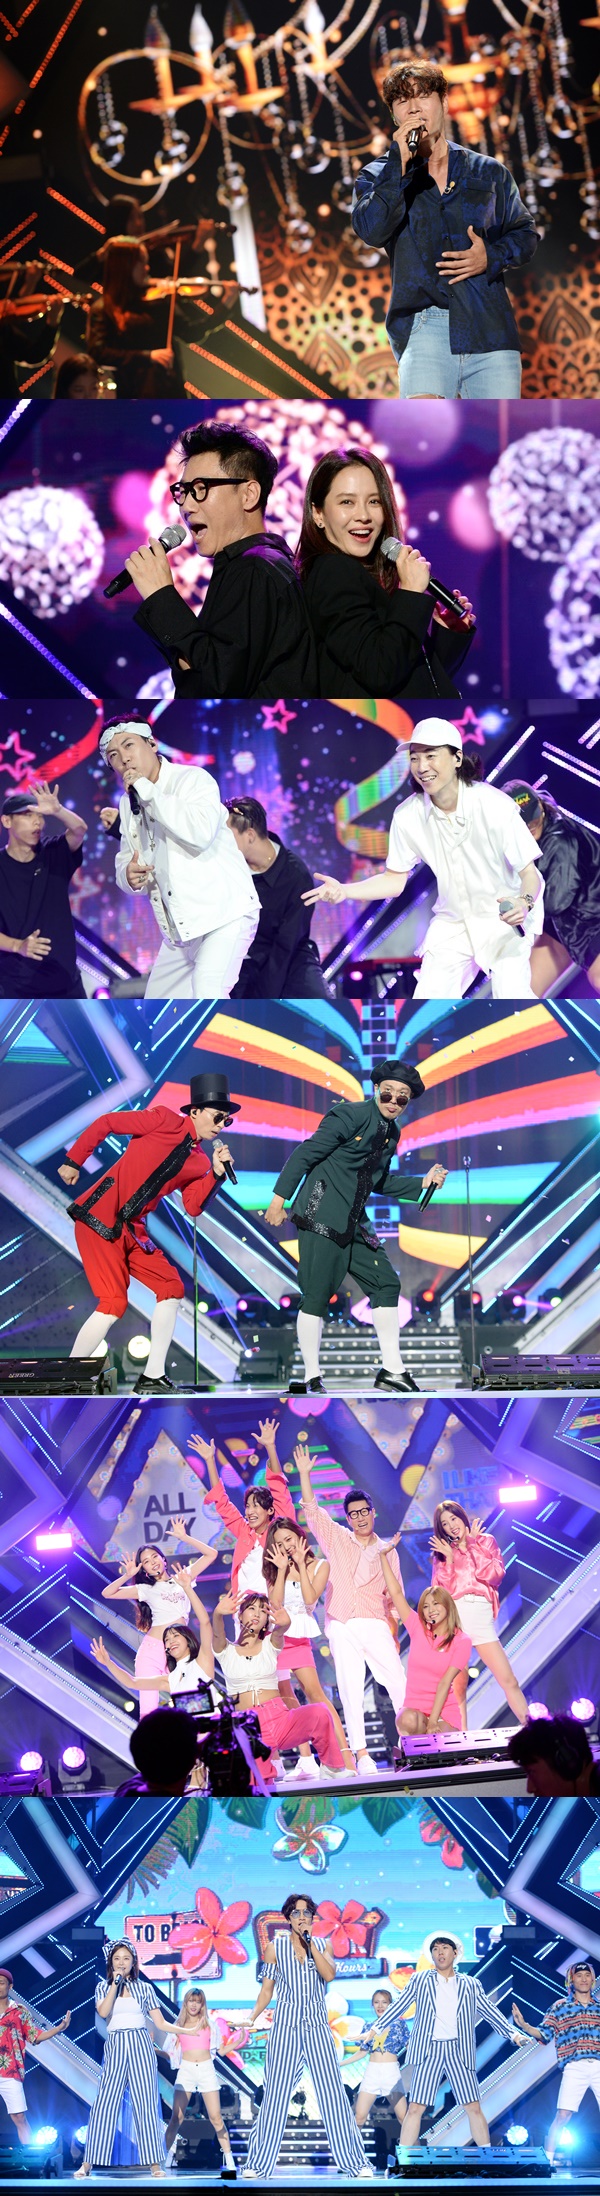 On SBS Running Man, which will be broadcast on the 15th, the second story of the 9th anniversary fan meeting Running District will be held, and the Collabo stage with the artists of the Choi Jing Prize will be released.According to the production crew, the members will show their individual stages for only fans.Ji Suk-jin & Song Ji-hyo, who usually showed the Team-Tae-Gyeong-Gyeong-Gyeong-Chemmy, will show an unexpected appearance by preparing a duet song that emits fatal charm on stage.In addition, Kim Jong-kook shows off his creepy singing skills for fans by singing the song Aladdin OST Speechless, a topic song, in the aspect of a 24-year veteran singer, not a talented Kim Jong-kook.In addition, Lee Kwang-soo & Jeon So-min & Yang Se-chan Running Man youngest trio, which has been proud of their strong friendship within the team, has formed a new group for fans and presents unexpected surprise performance and amazing fan service.Meanwhile, while the sexy dance of Dumbs is foreseen in the group dance, Song Ji-hyo and Jeon So-min show off their tremendous beauty on individual stages, respectively.The couple of Yoo Jae-Suk and Haha who won the duet stage with penalties are expected to be a big topic by bringing explosive field reaction with dance and colorful performance reminiscent of Michael Jackson.In particular, the stage with the domestic Choi Jing awards The Artists is also unveiled. The Collabo stage, which has brilliantly illuminated the fan meeting stage with various attractions filled with individuality of each team, can be seen at Running Man broadcasted at 5 pm on the 15th.